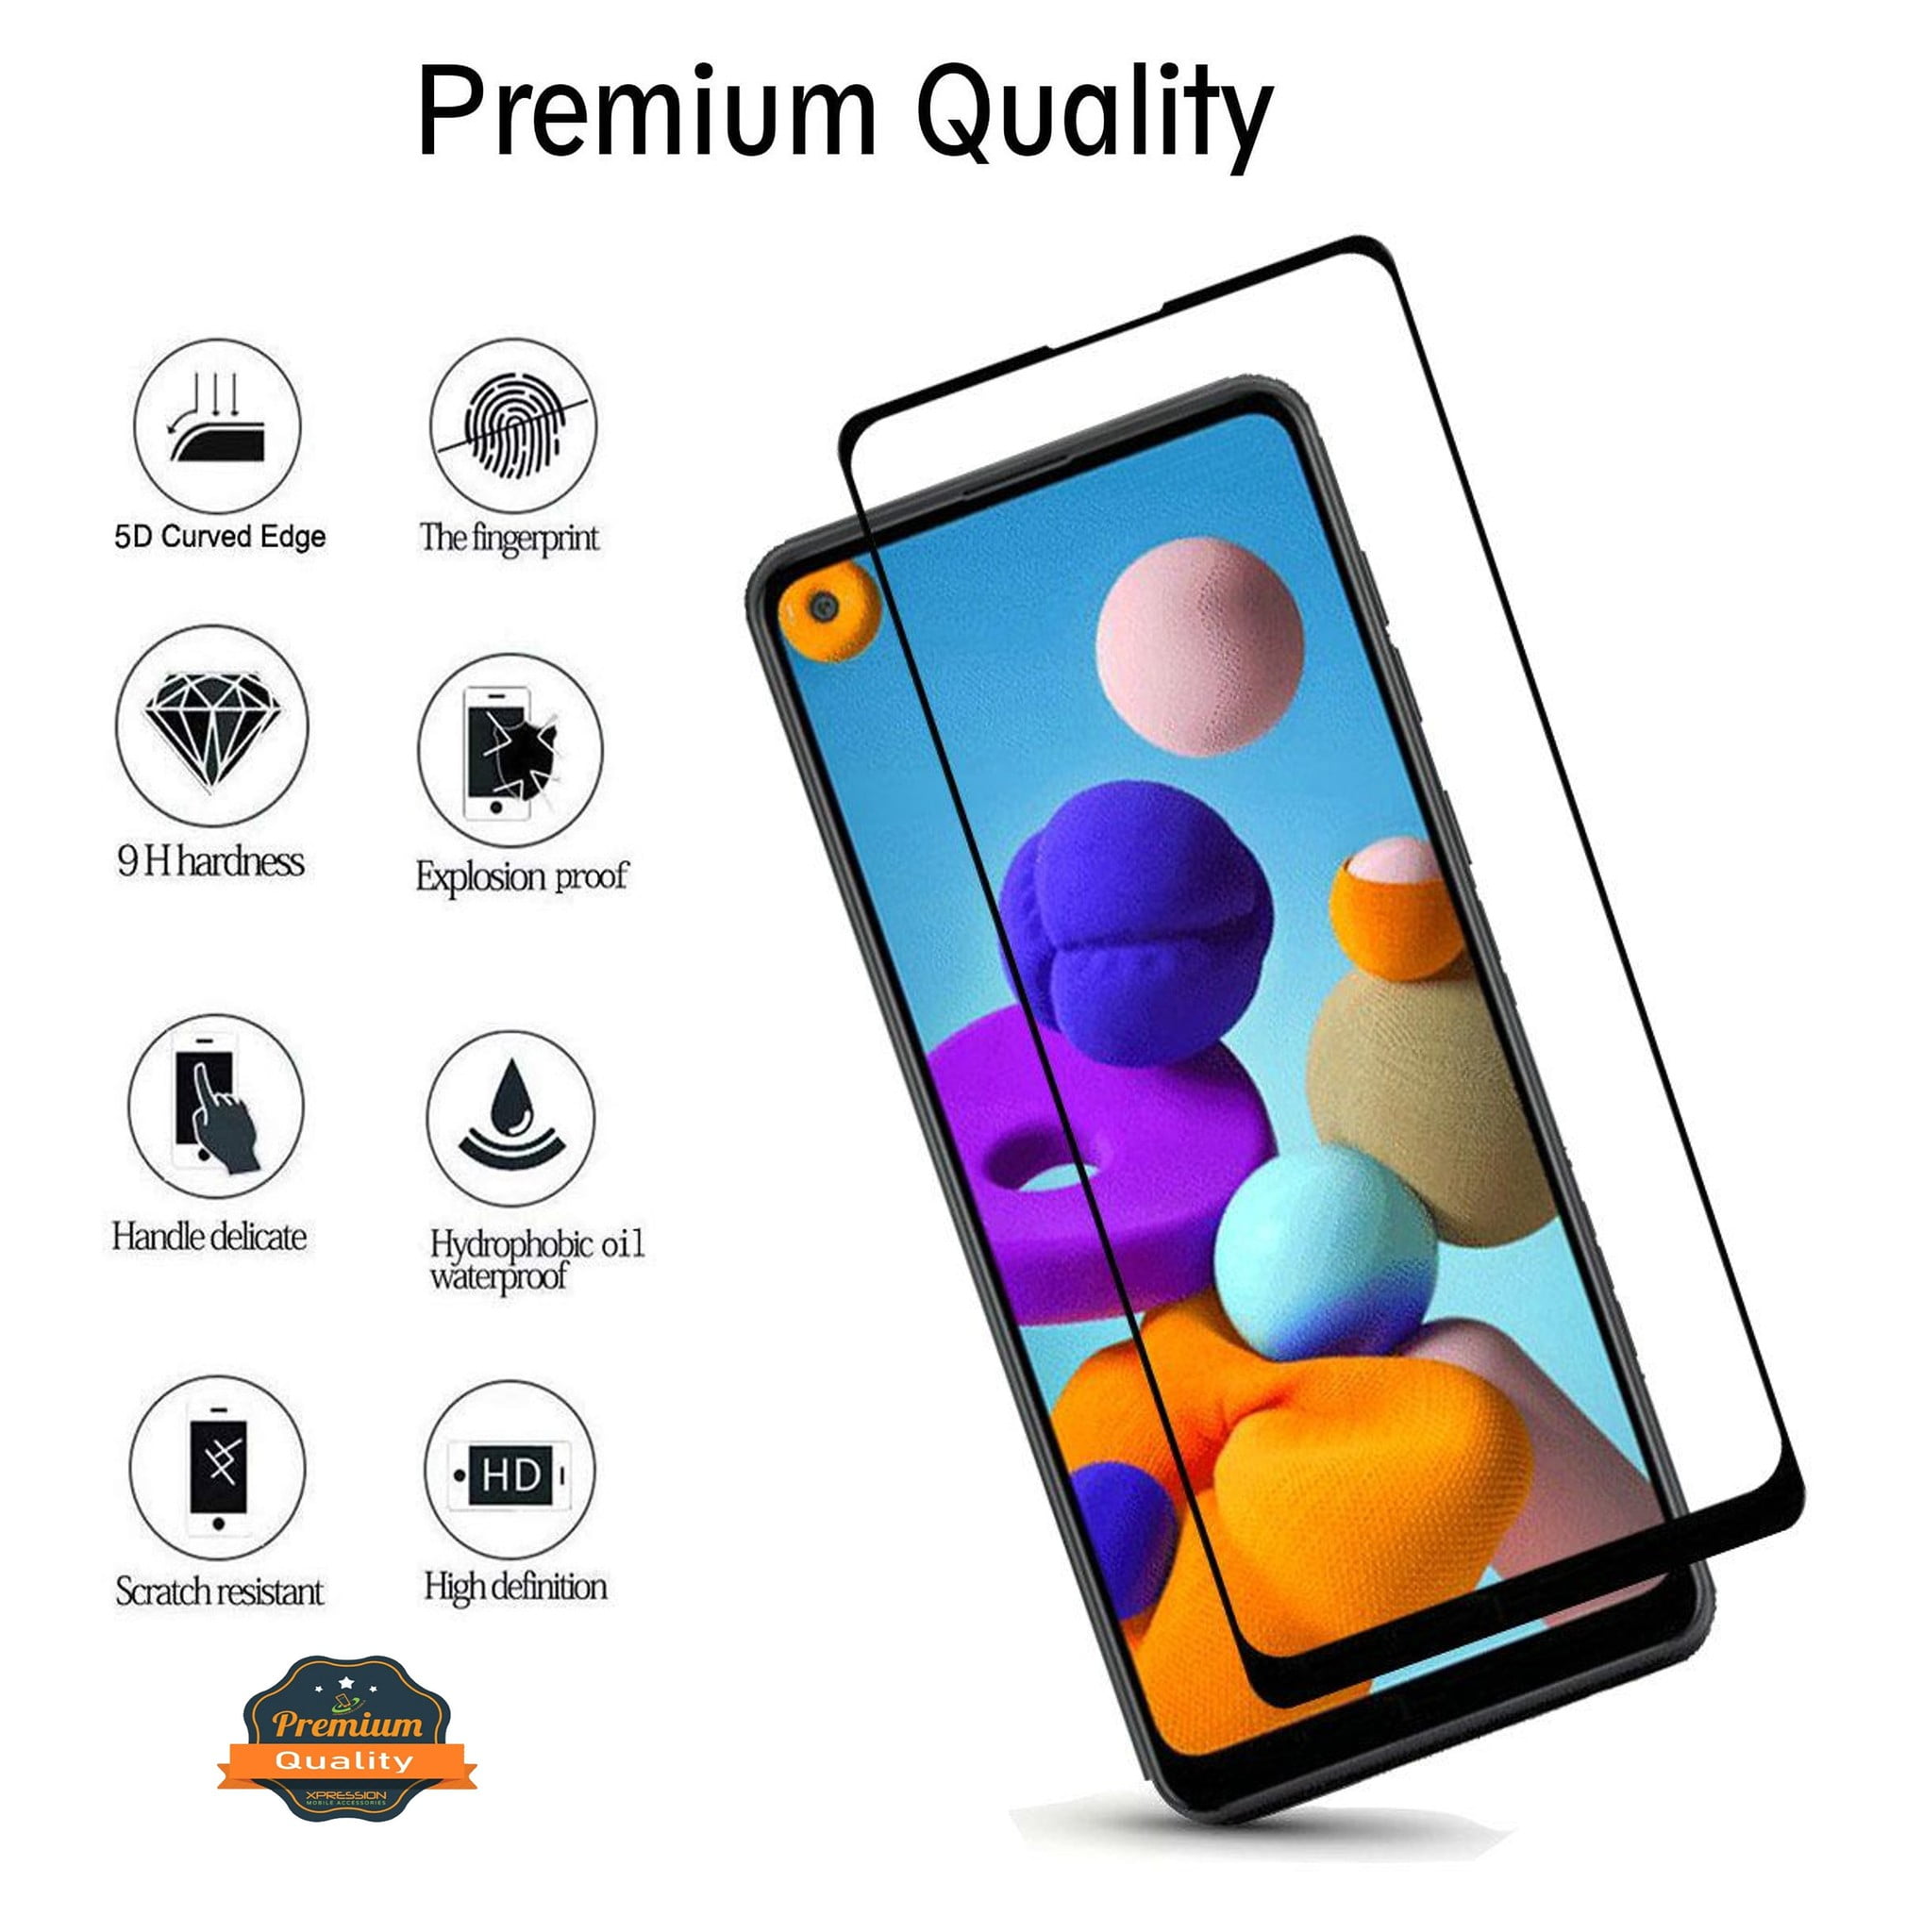 9H Hardness V350U Screen Protector Tempered Glass Beukei Compatible for Cricket Influence/AT&T Maestro Plus Touch Sensitive,Case Friendly 3 Pack